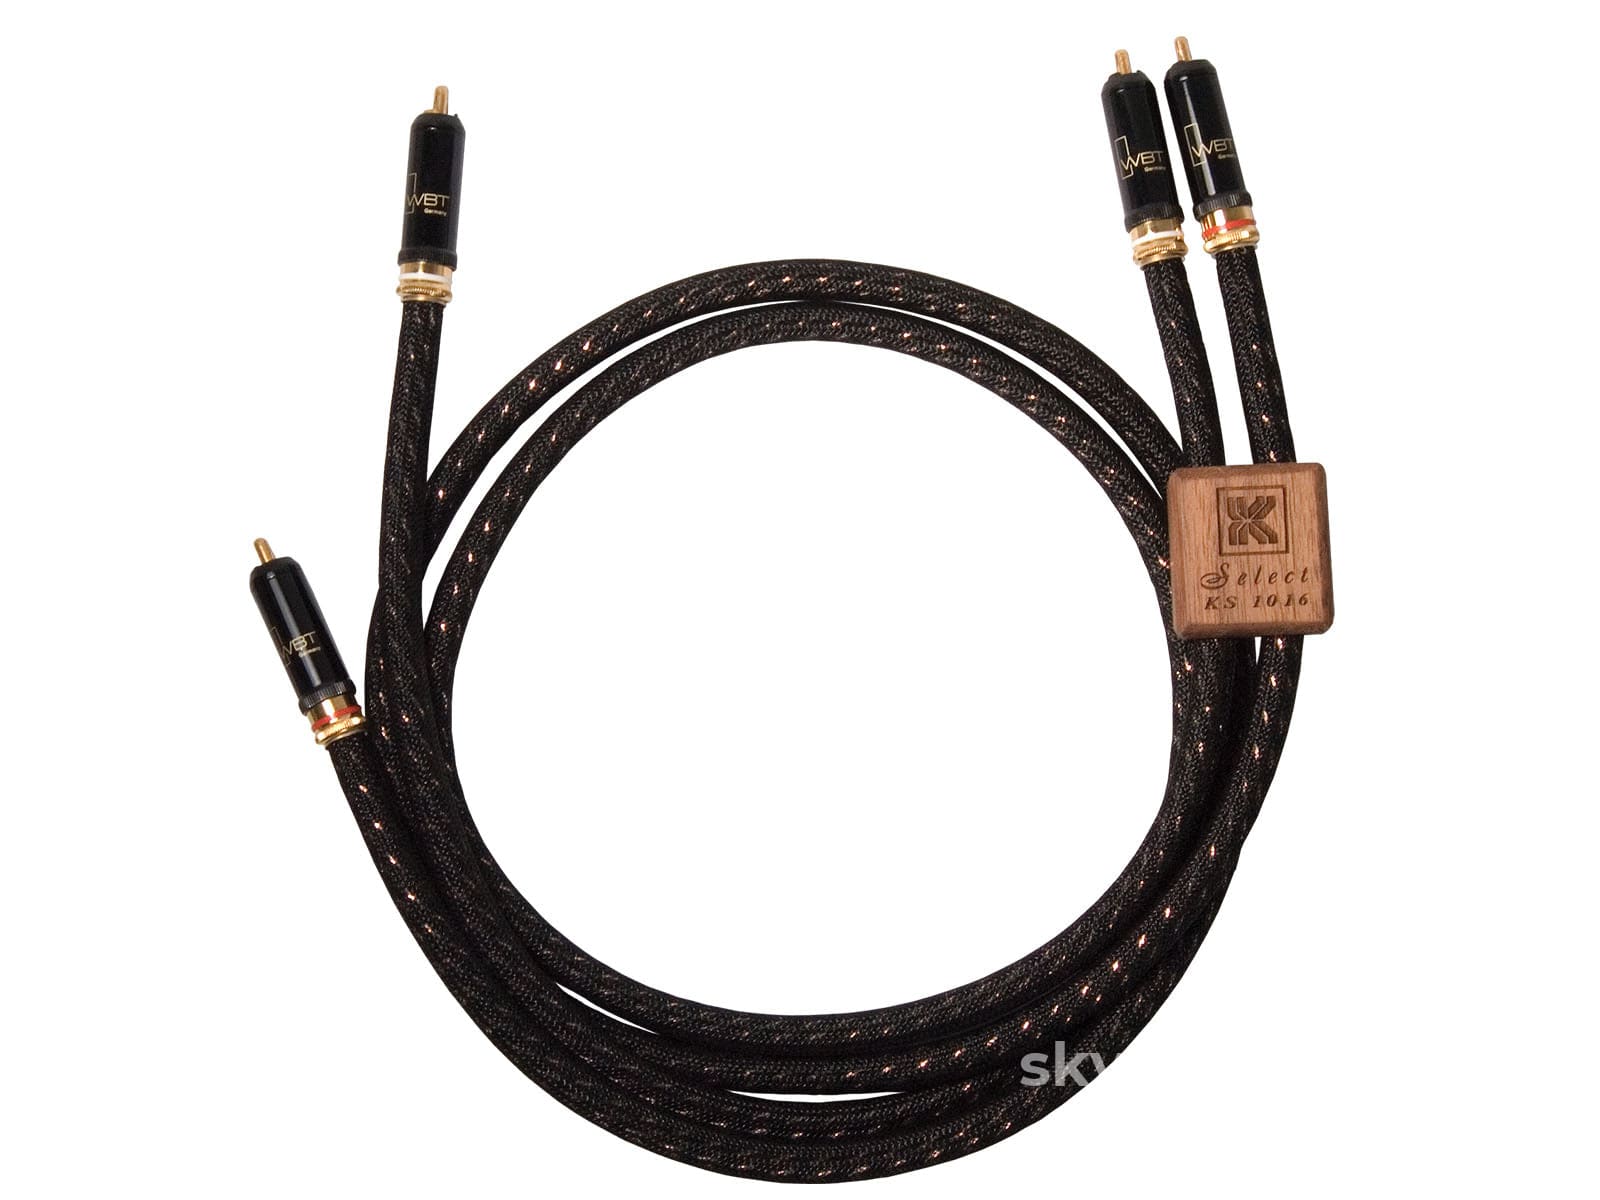 Kimber Kable - Select Series Ks1016 Copper Rca Analog Interconnects (Pair) Wbt Connectors New Cables